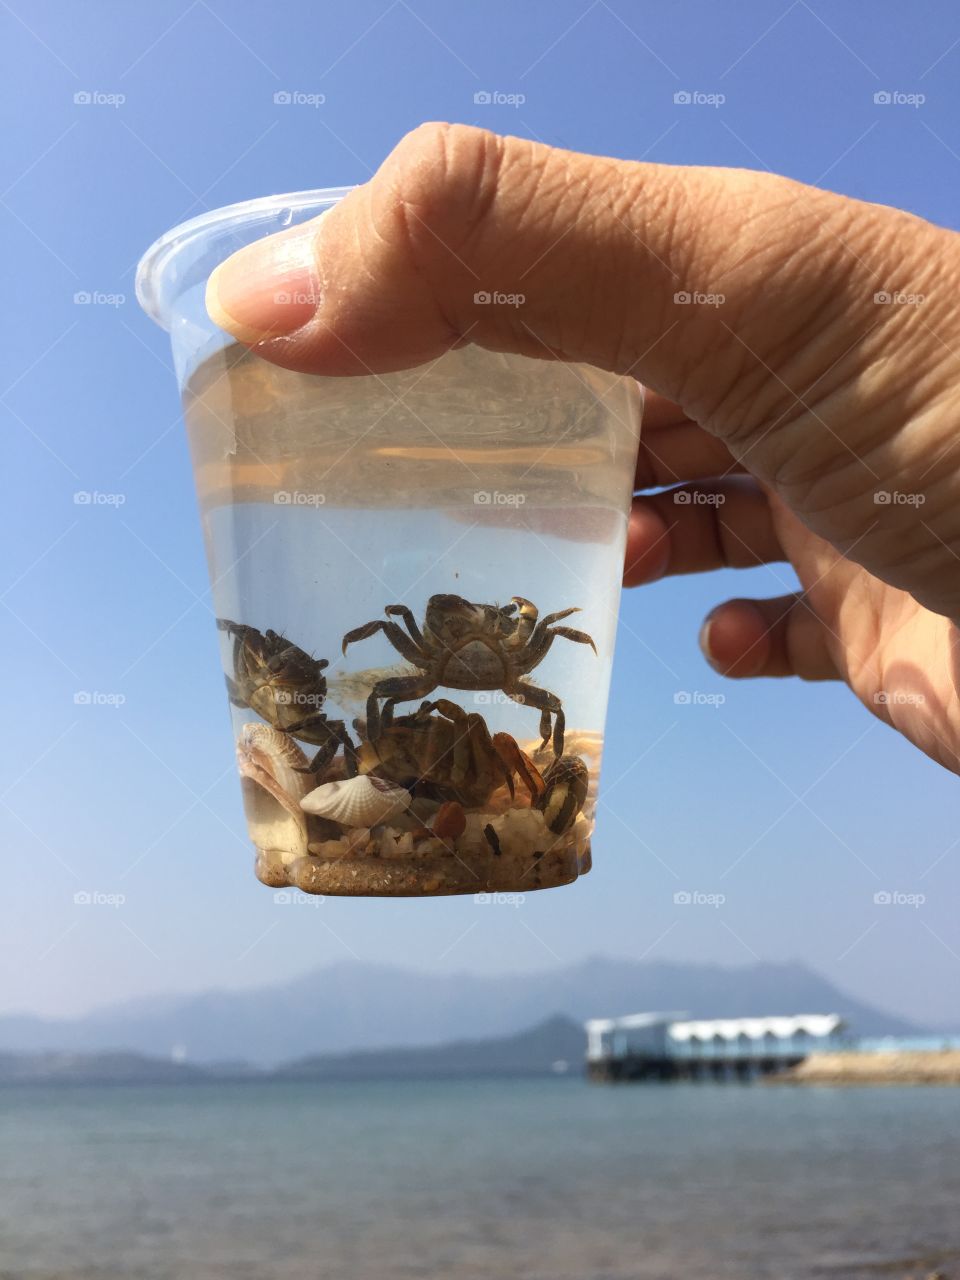 Crab in a cup